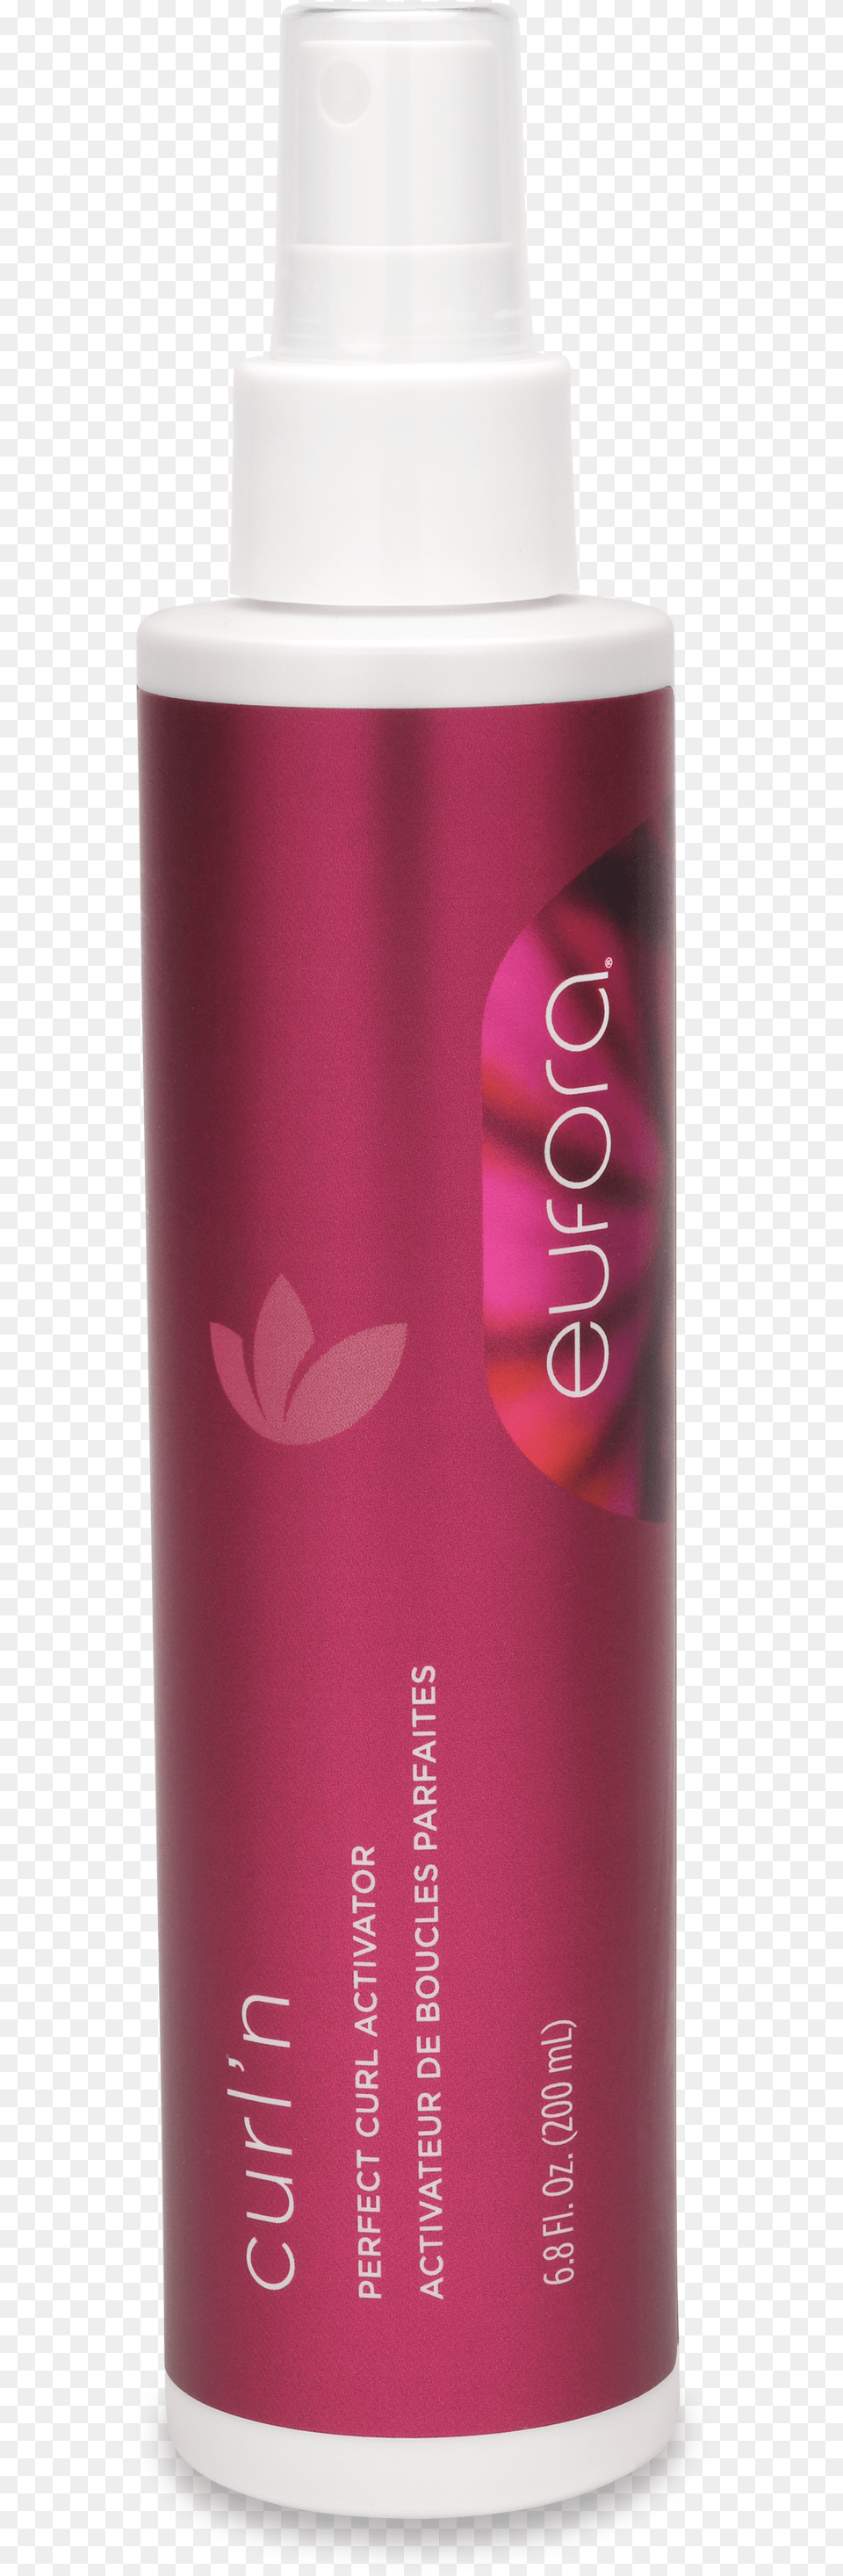 Cosmetics, Bottle, Lotion, Shaker Free Png